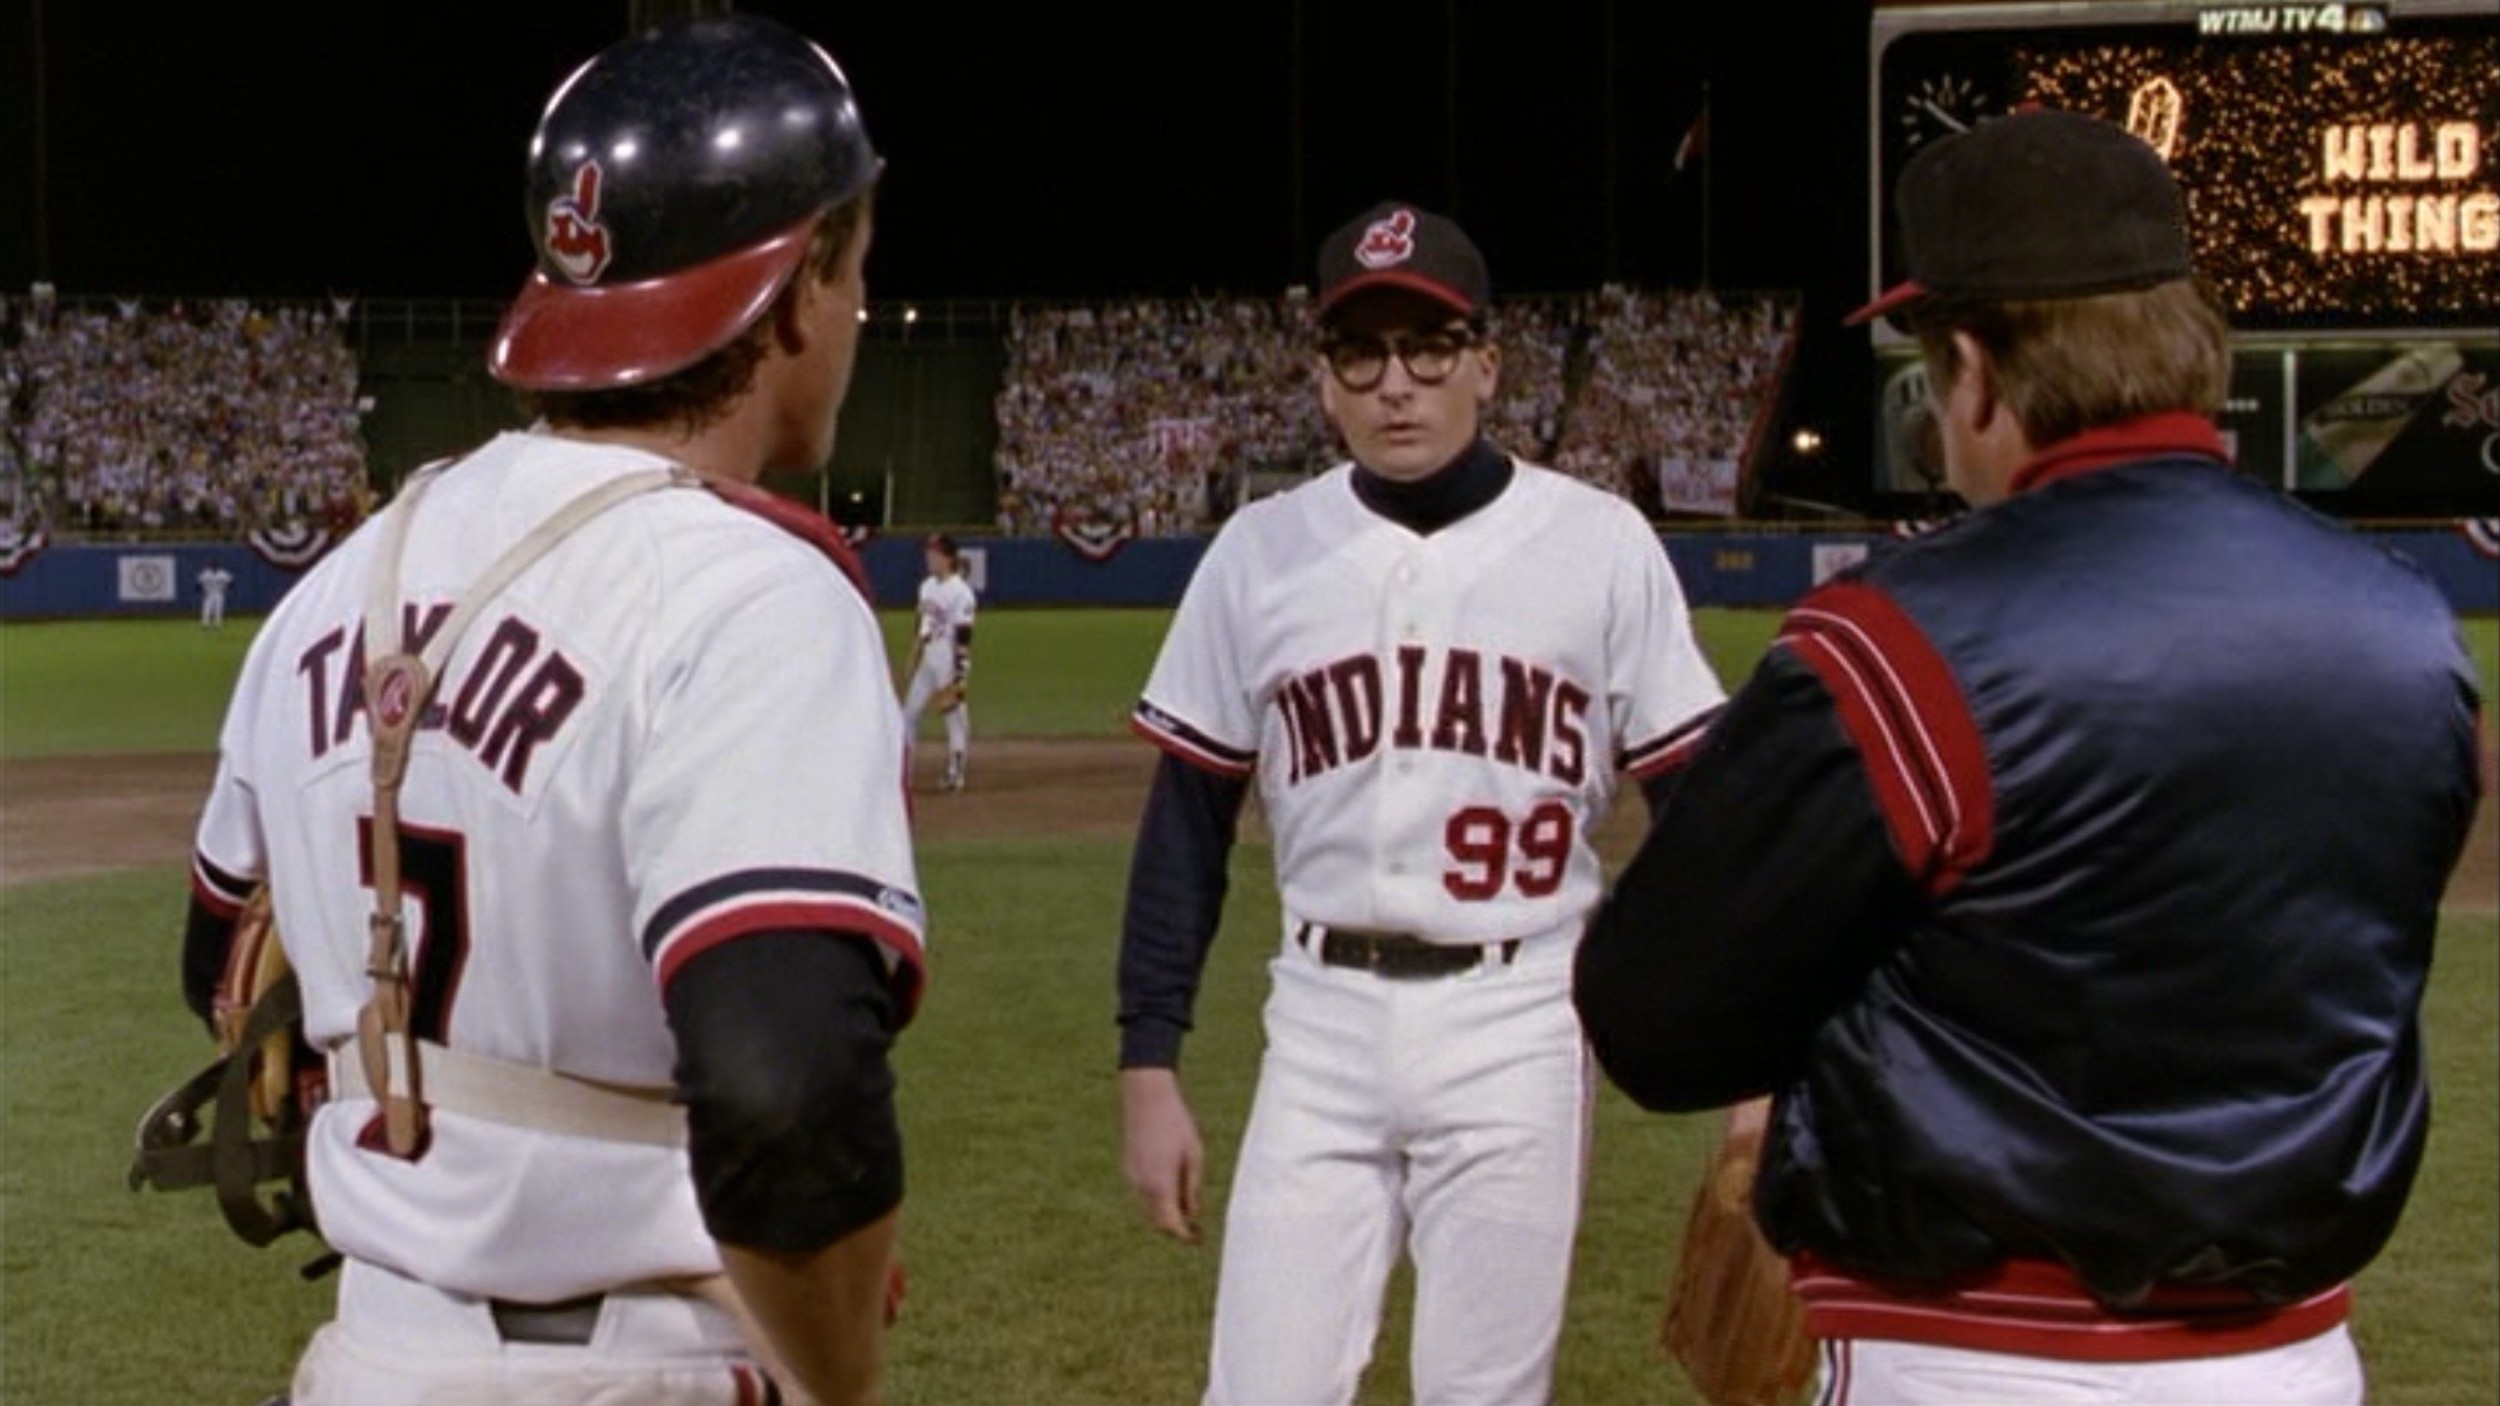 <p>“Major League” spawned a couple of mediocre sequels, but the first film is a solid sports comedy. It’s a classic underdog story, helped by the fact it used actual MLB teams in the story. Not every sports movie is that lucky. If only it wasn’t the Cleveland Indians. Sure, it made sense from a team history perspective, but nothing featuring Chief Wahoo stands the test of time.</p><p><a href='https://www.msn.com/en-us/community/channel/vid-cj9pqbr0vn9in2b6ddcd8sfgpfq6x6utp44fssrv6mc2gtybw0us'>Follow us on MSN to see more of our exclusive entertainment content.</a></p>